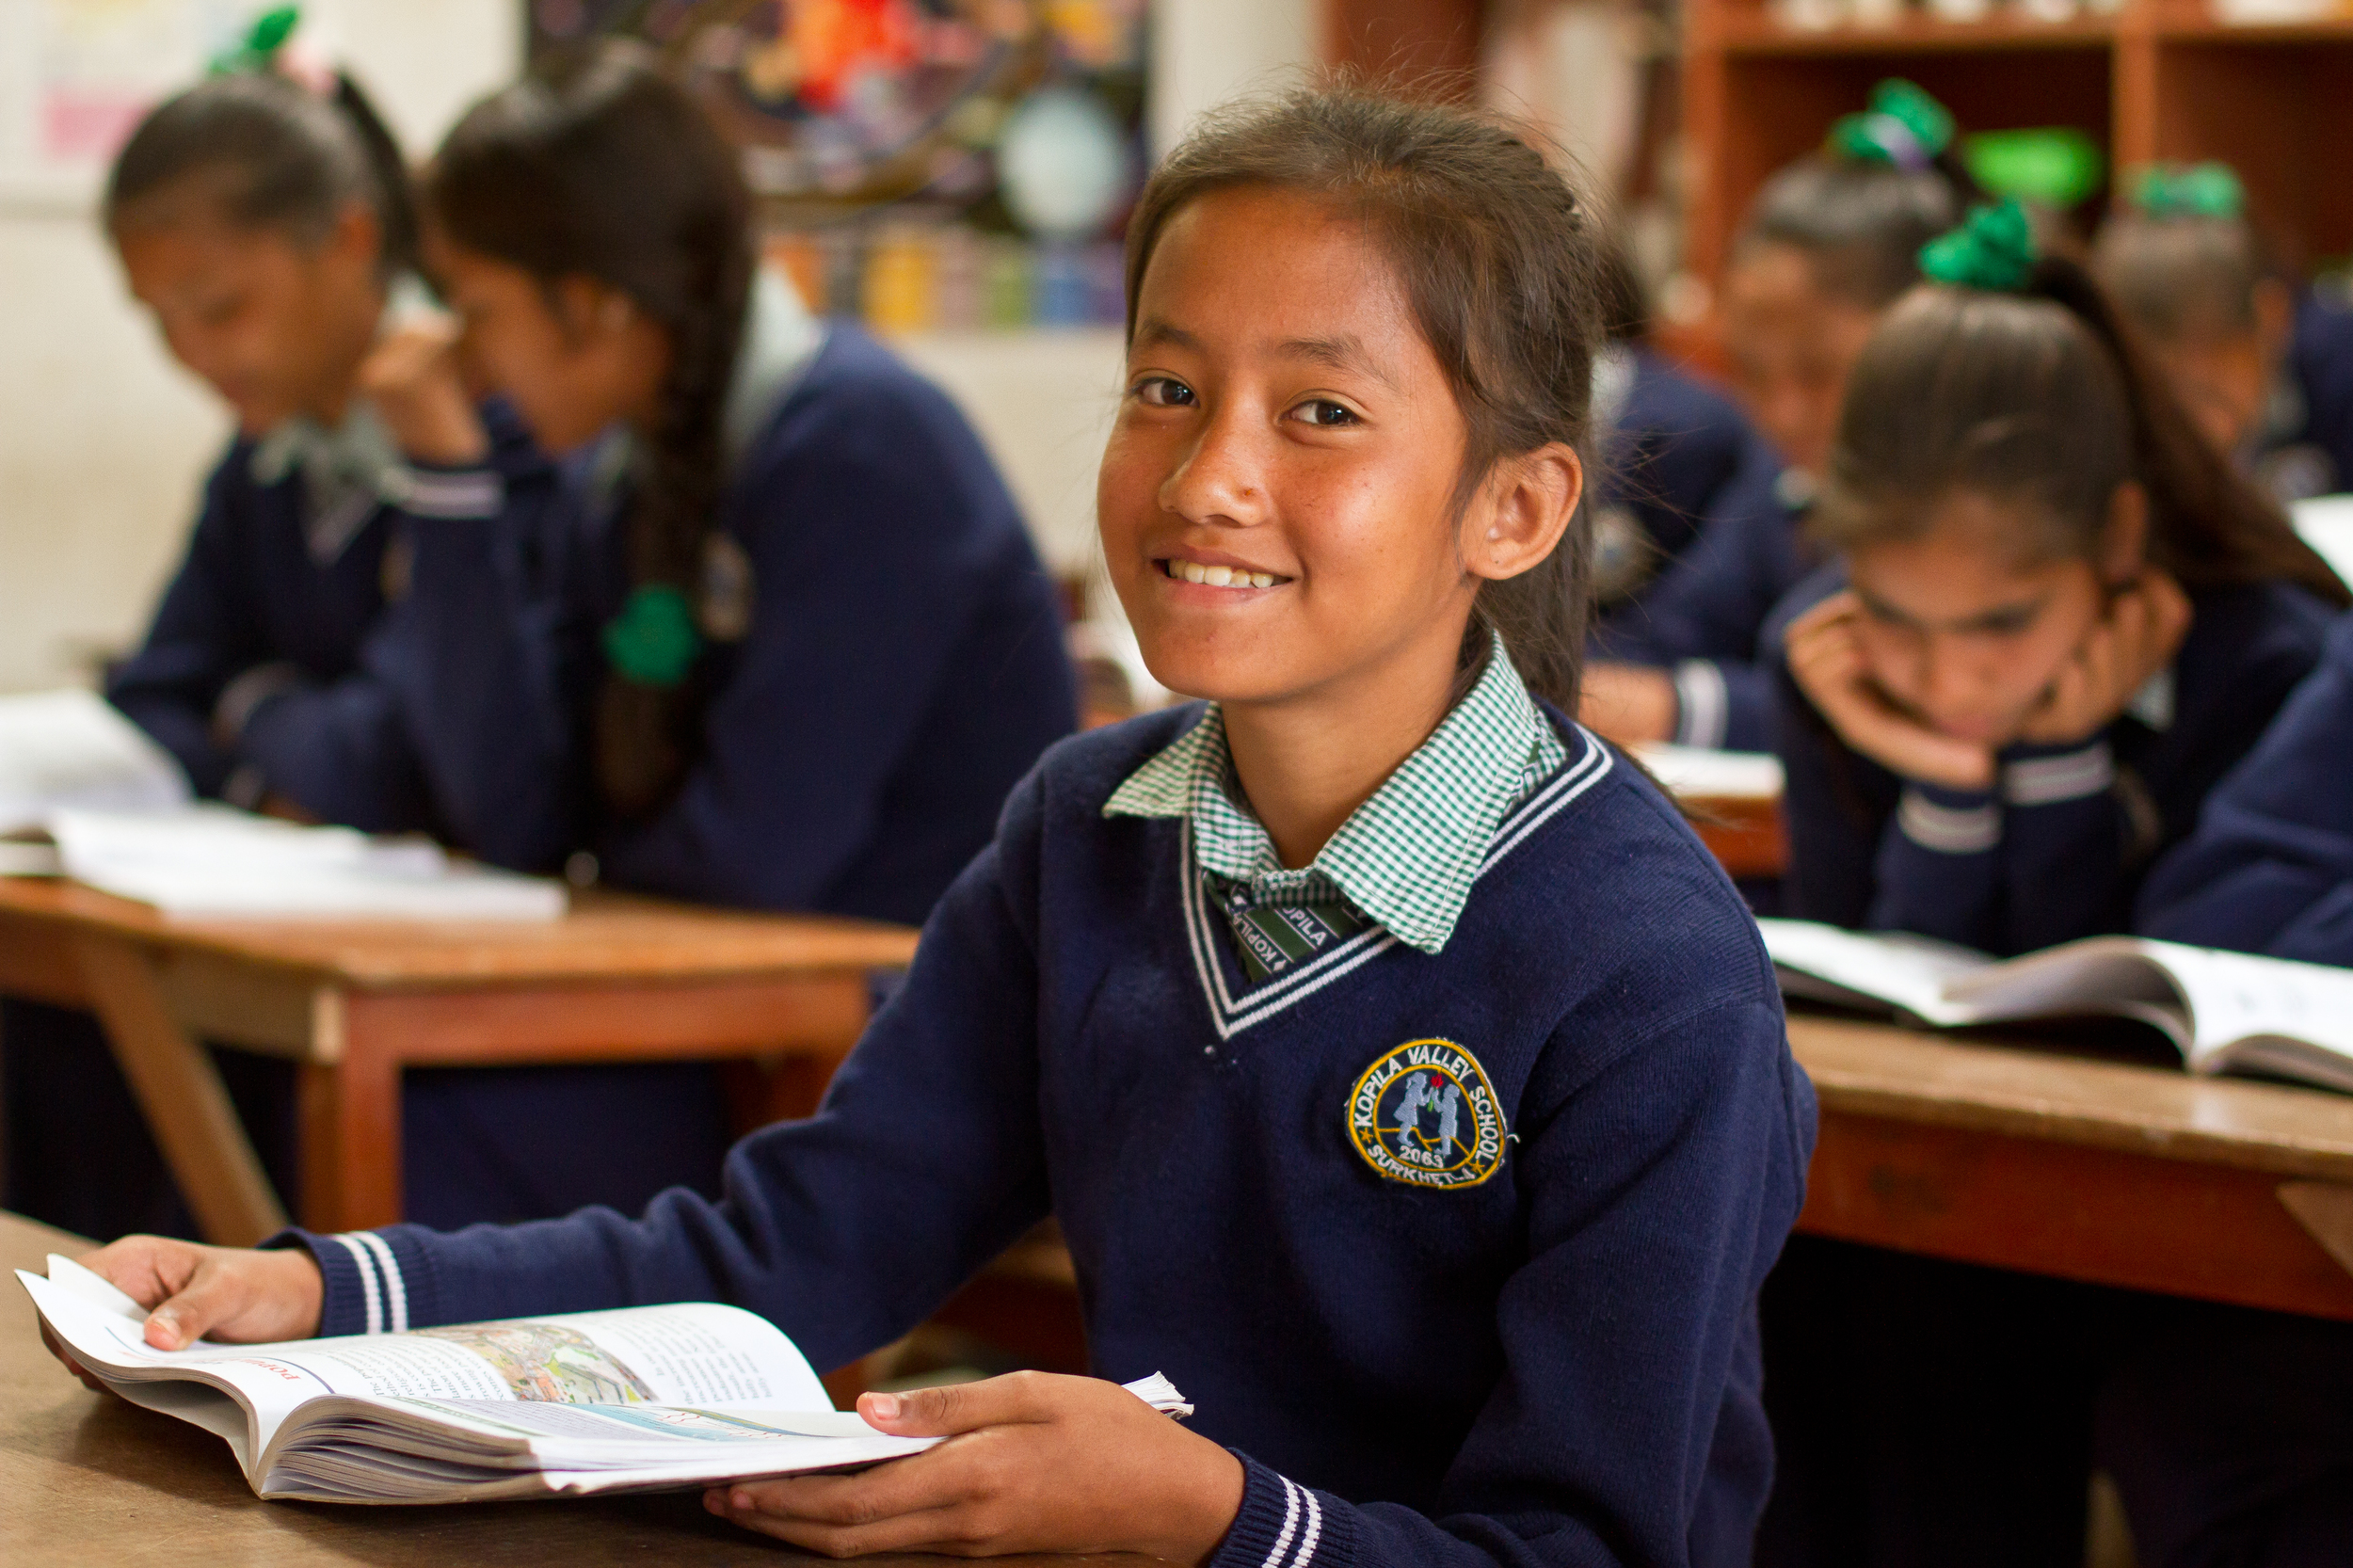  She's the First Scholar and sixth grader Supeksha G. poses in her school's science classroom in Nepal, March 2015. (photo by Kate Lord) 